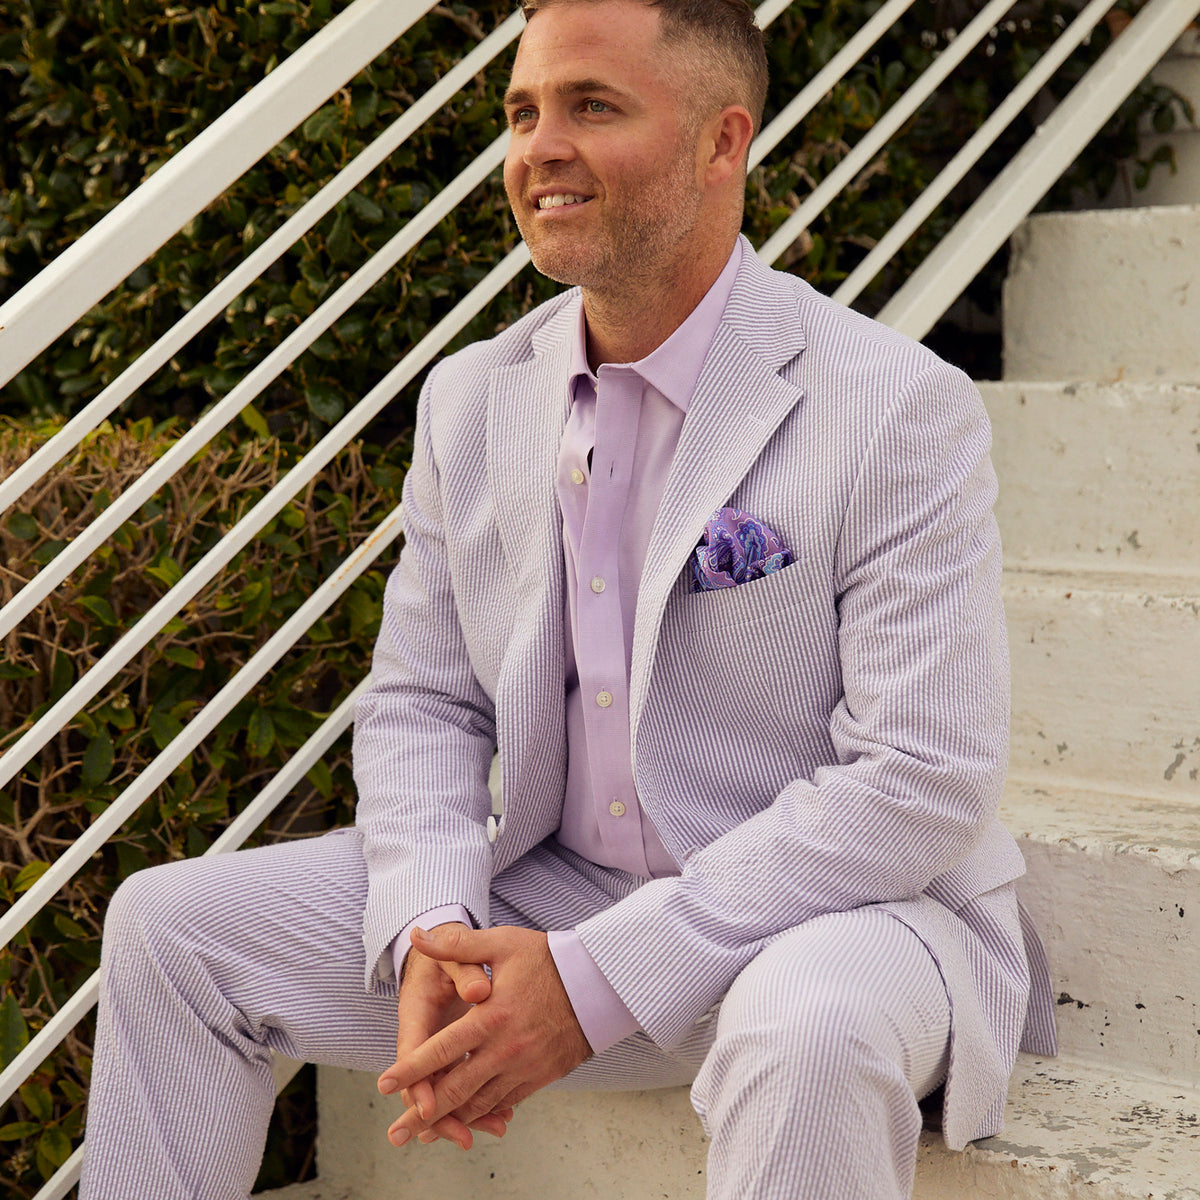 Turn heads in this exquisite Purple Haze Seersucker Stretch Sport Coat! Sleek and stylish, this classic is sure to cause a stir at your next event. With a unique purple hue and a comfortable stretch, this sport coat is perfect for adding a bold touch of sophistication to any look. Get your &quot;haze&quot; on and start feeling like a ten in this one-of-a-kind!